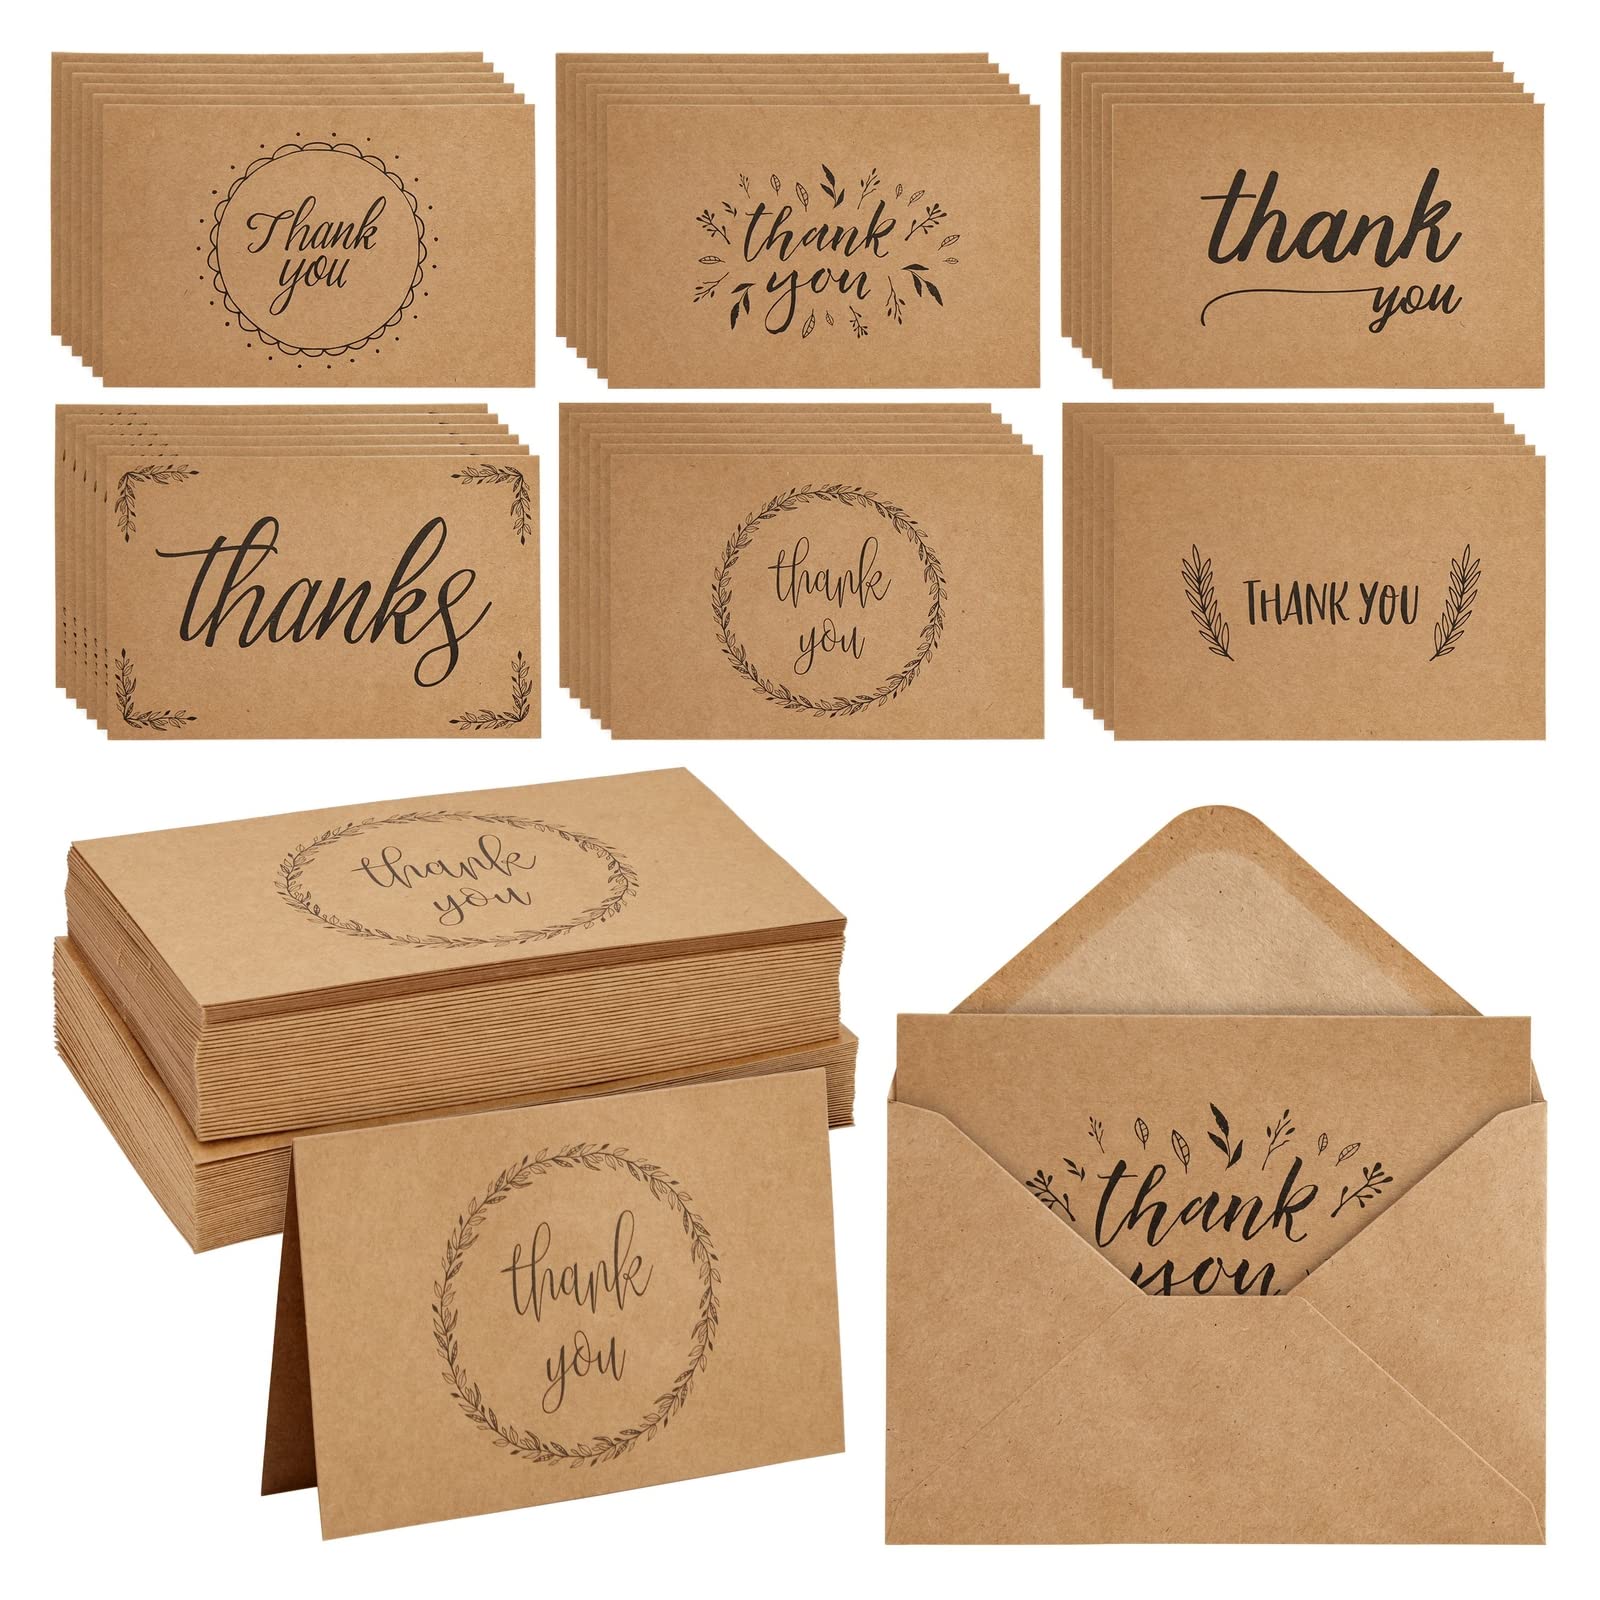 Thank You Cards - 36-Count Thank You Notes, Kraft Paper Bulk Thank You Cards Set - Blank on The Inside, Handwritten Style, Includes Thank You Cards and Envelopes, 4 x 6 inches